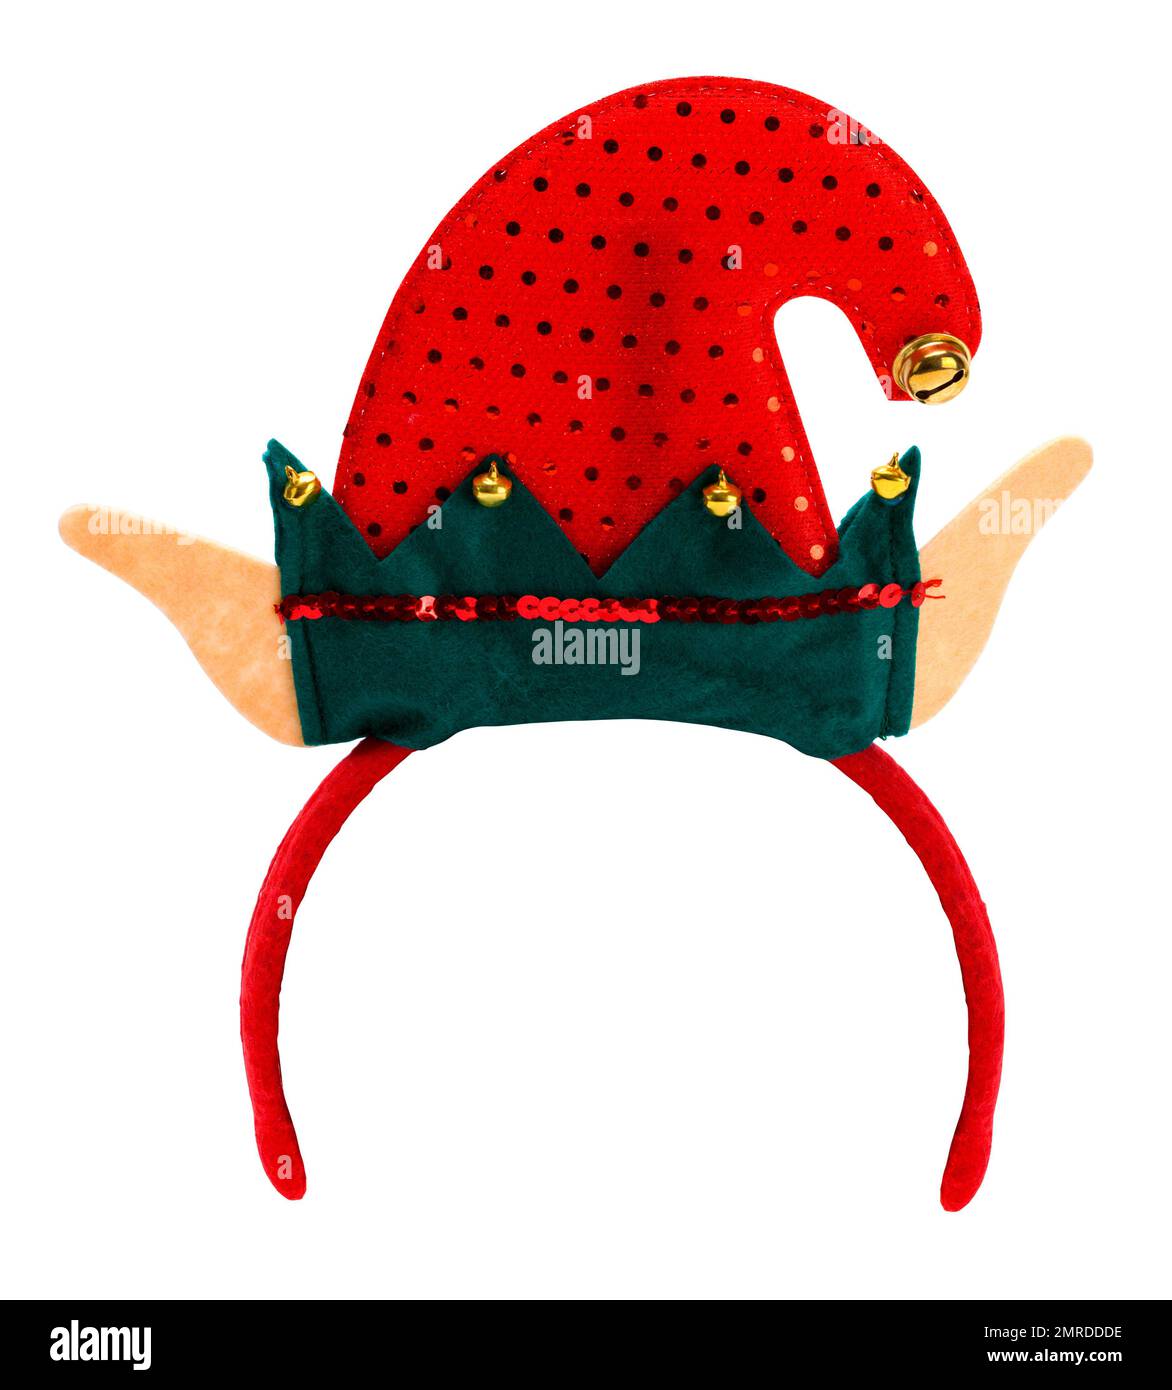 Red and Green Elf Hat Headband Cut Out On White. Stock Photo